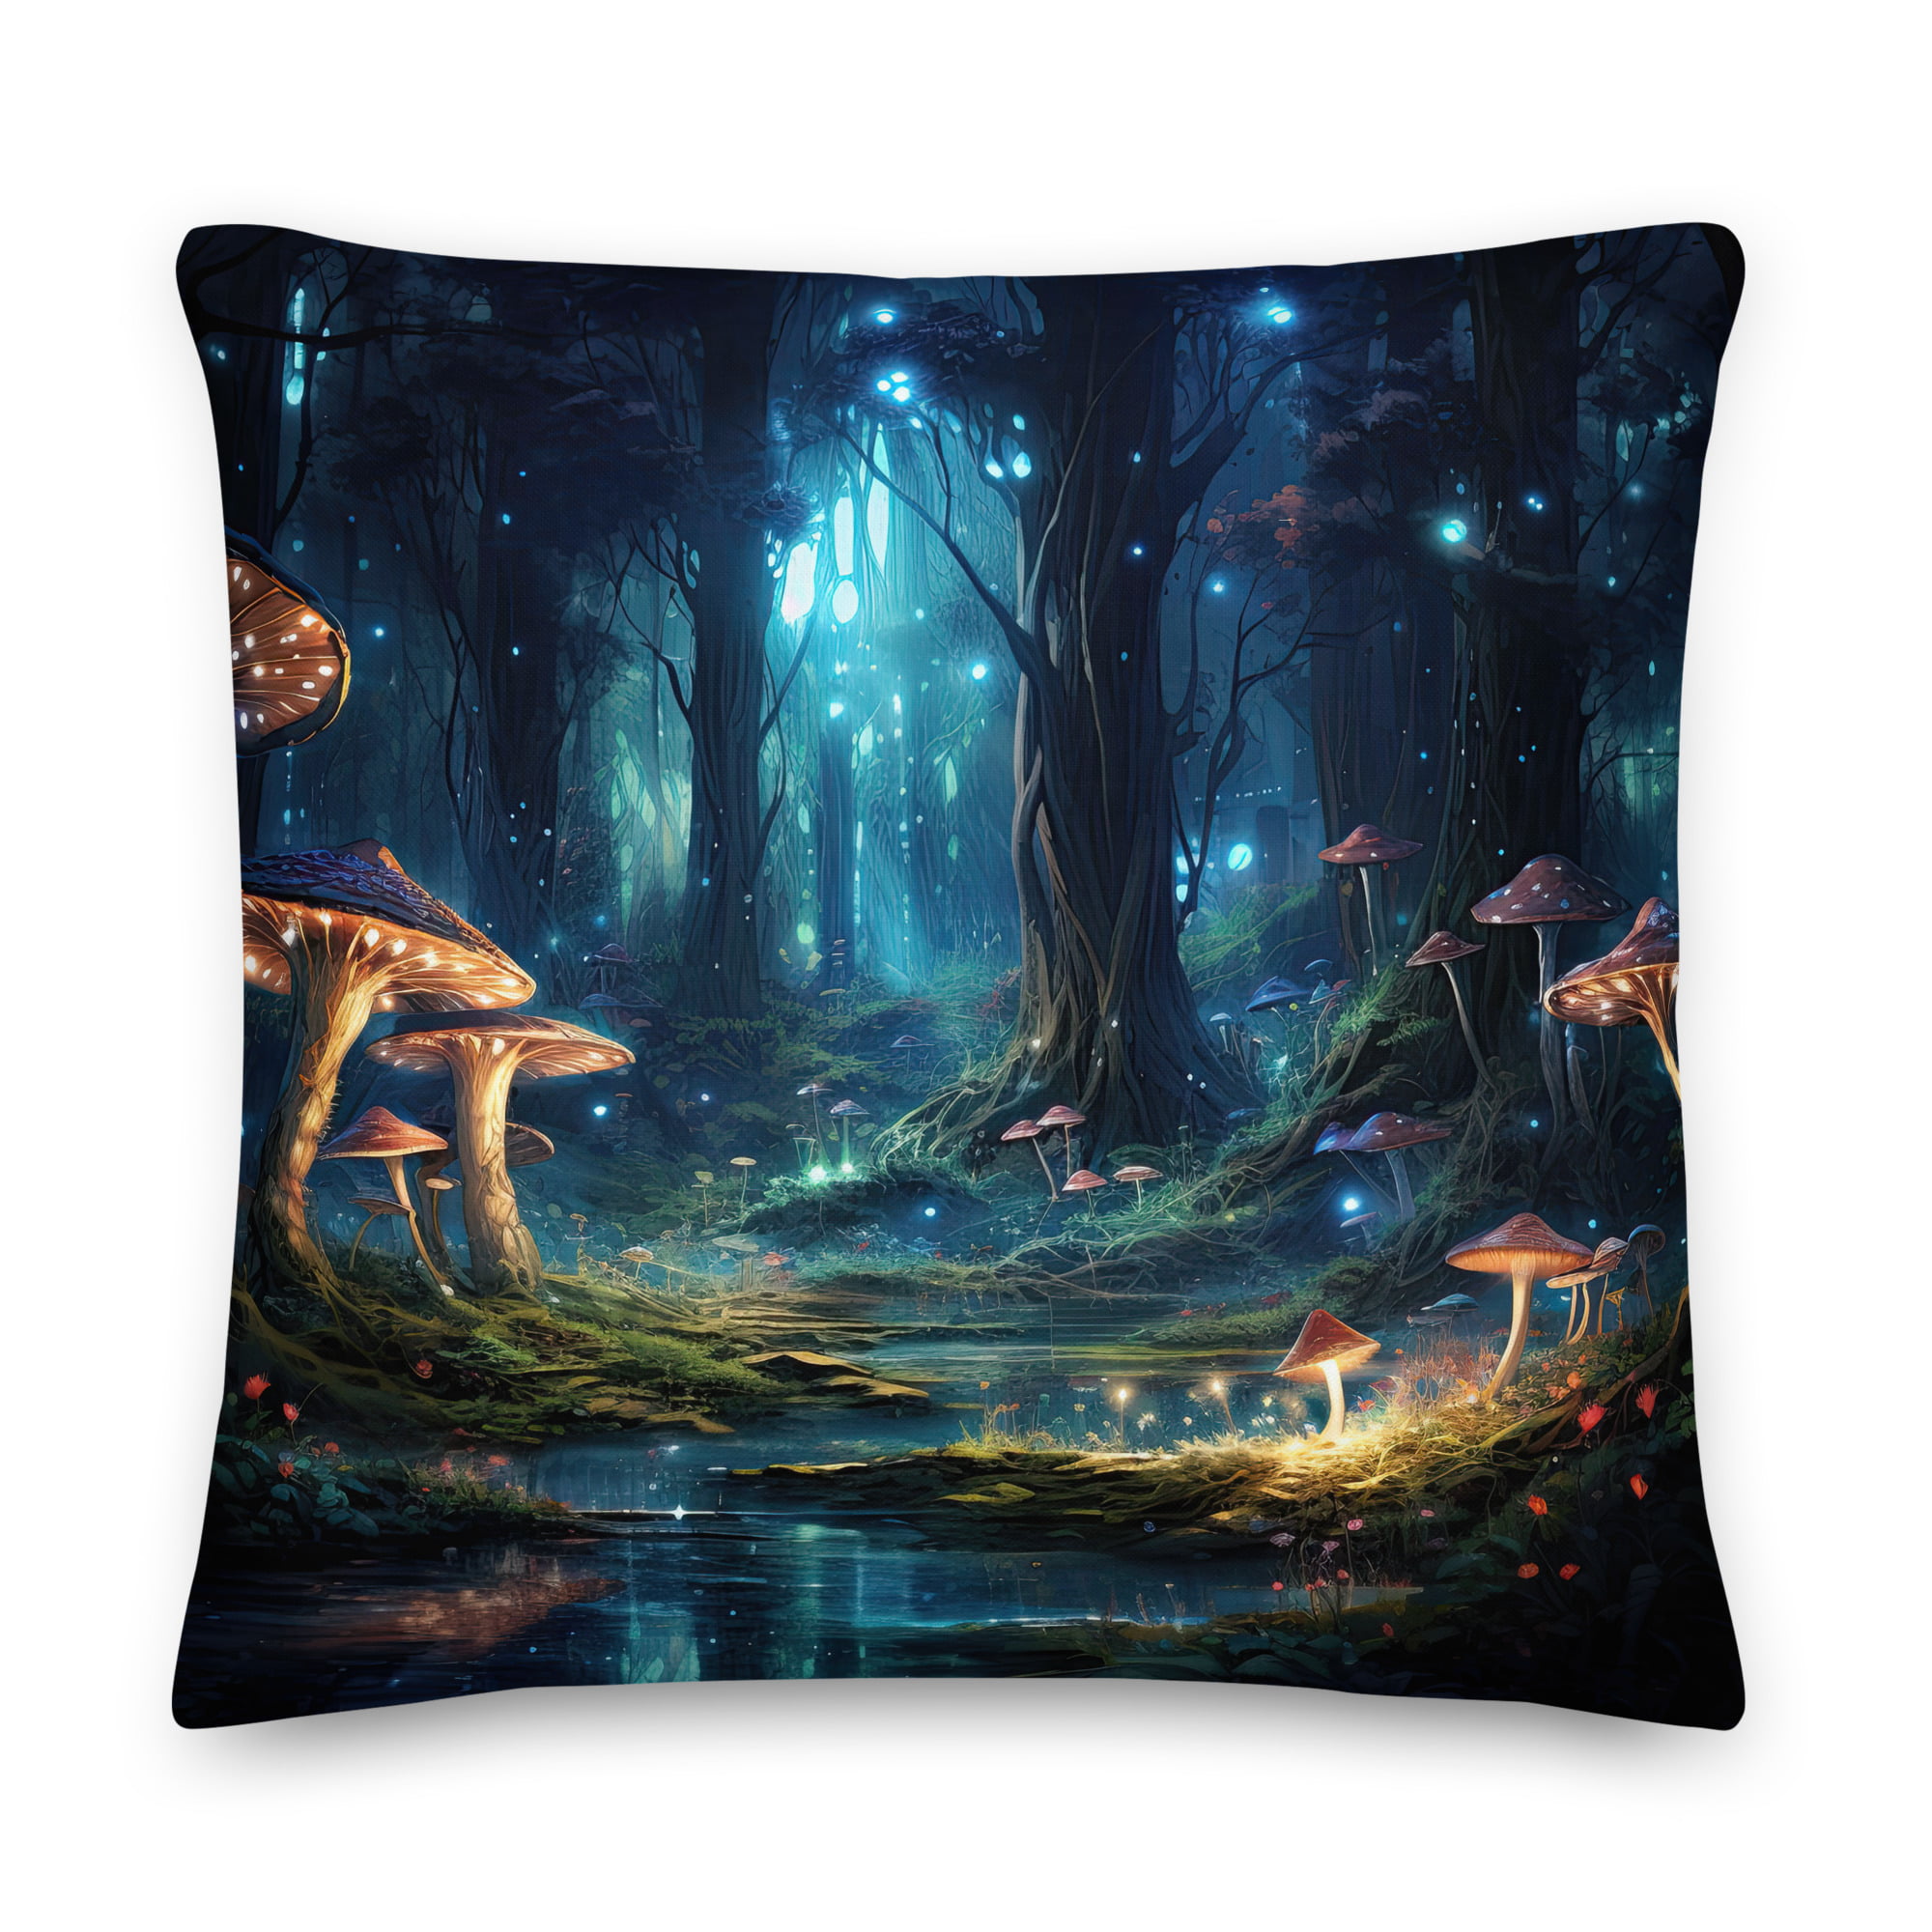 Enchanted Forest Premium Throw Pillow - 22×22